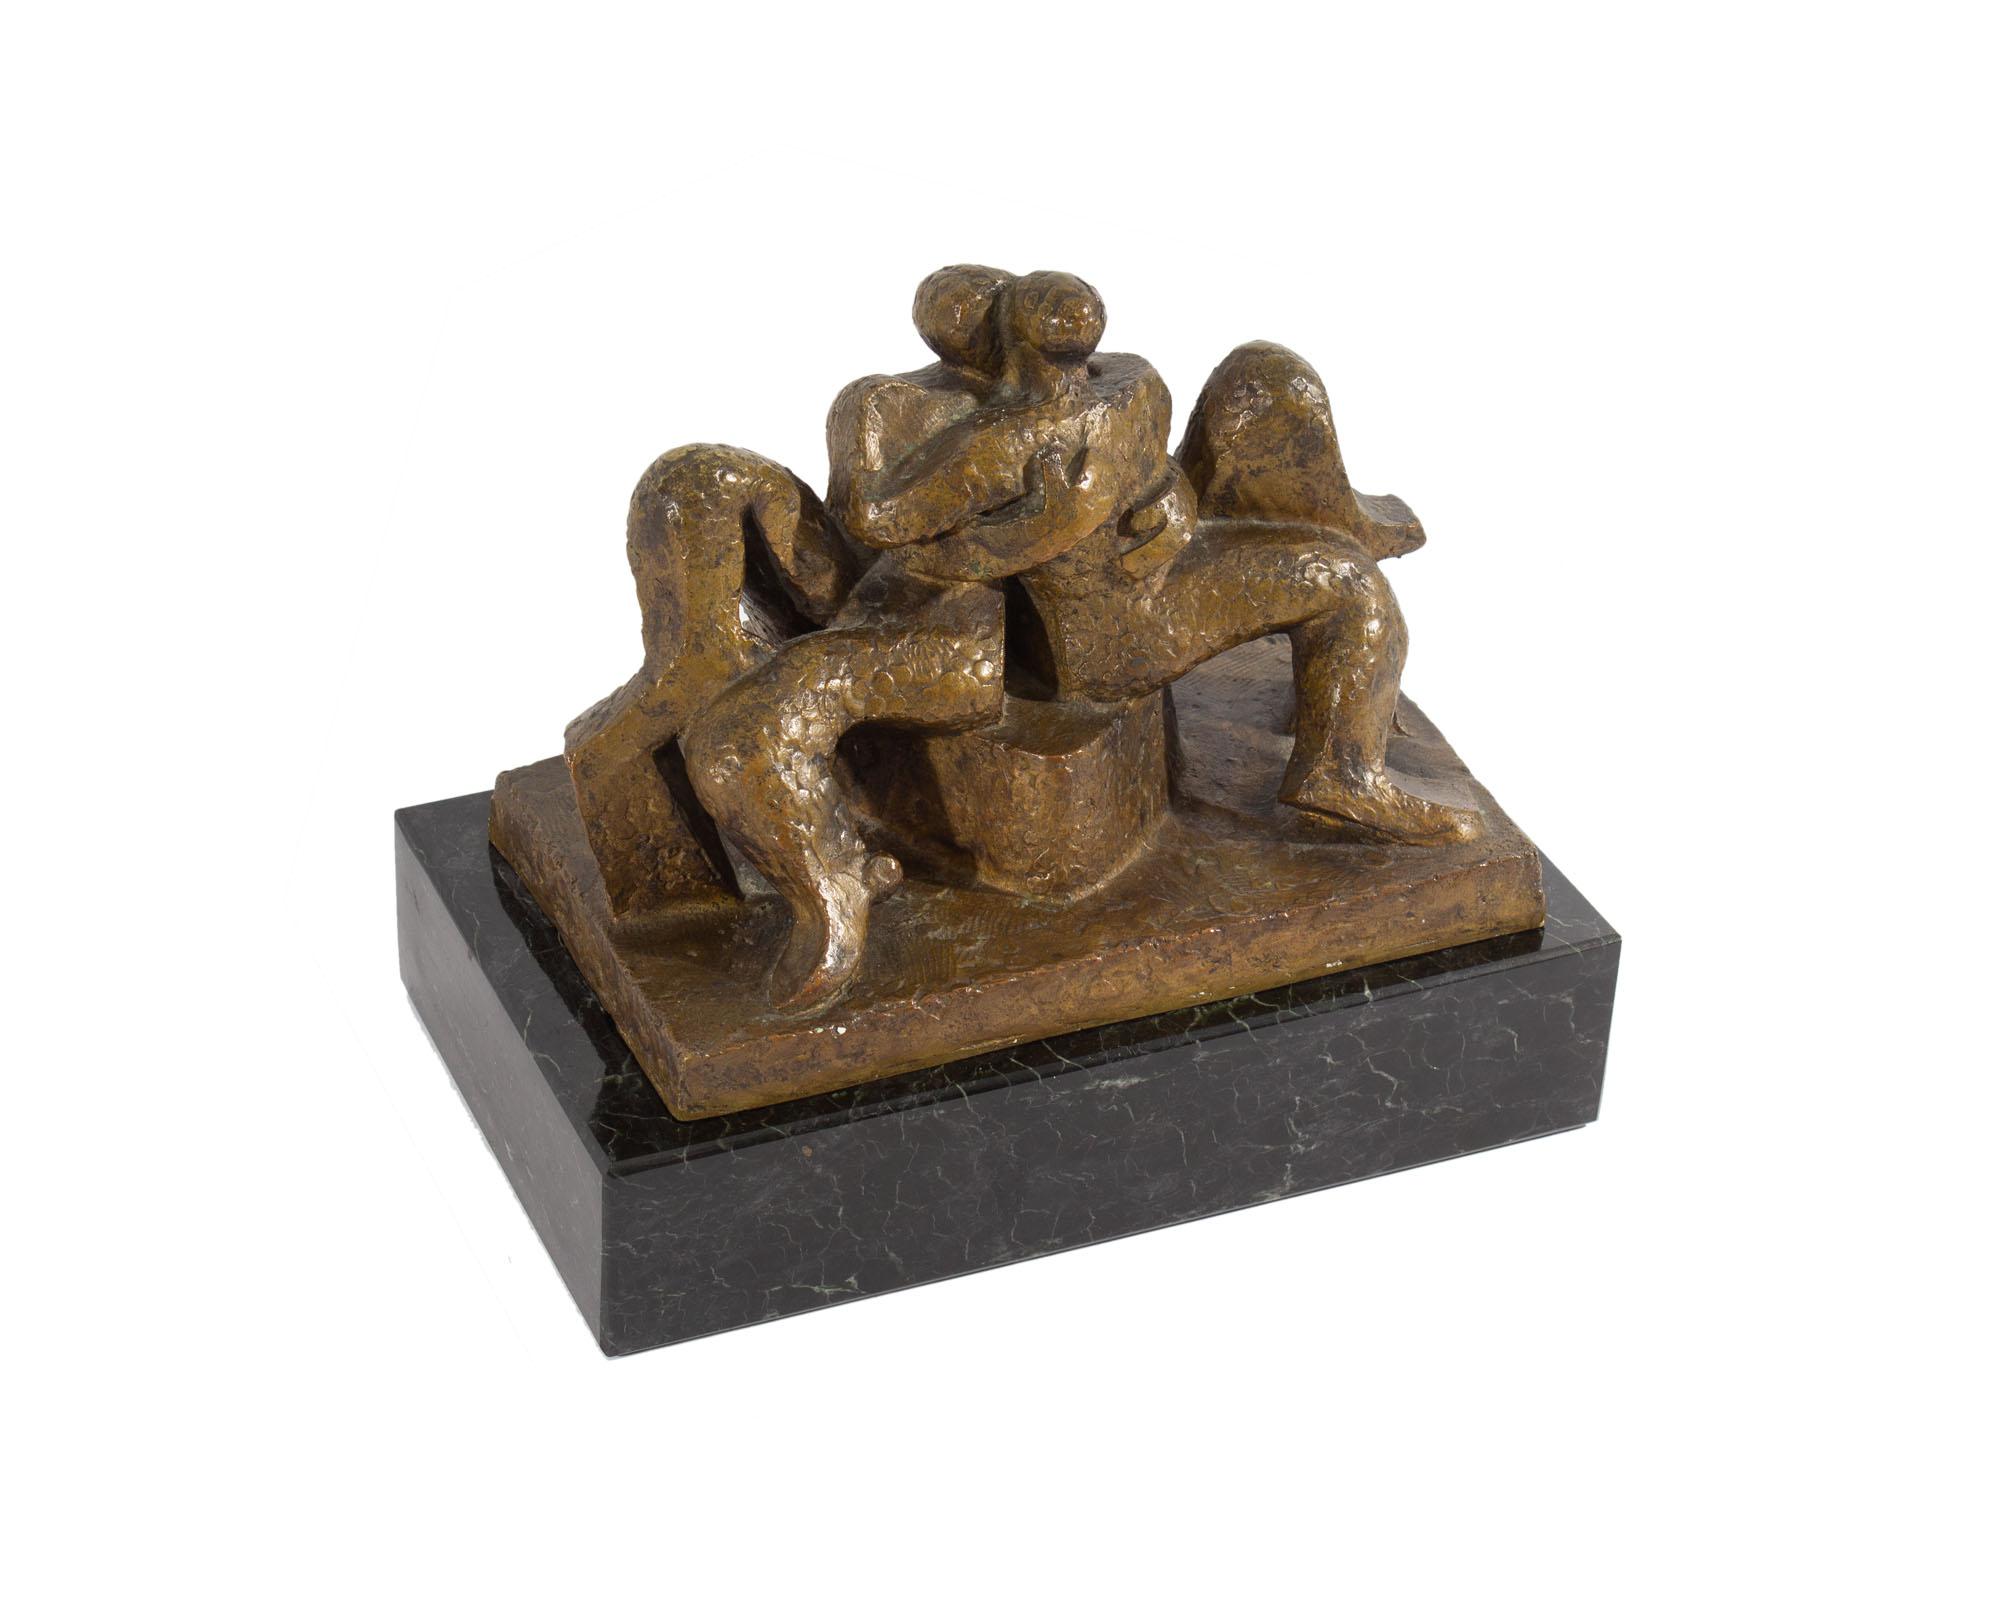 A limited edition bronze sculpture titled Lovers by the French artist Andre Beaudin (1895-1975). Signed and numbered 